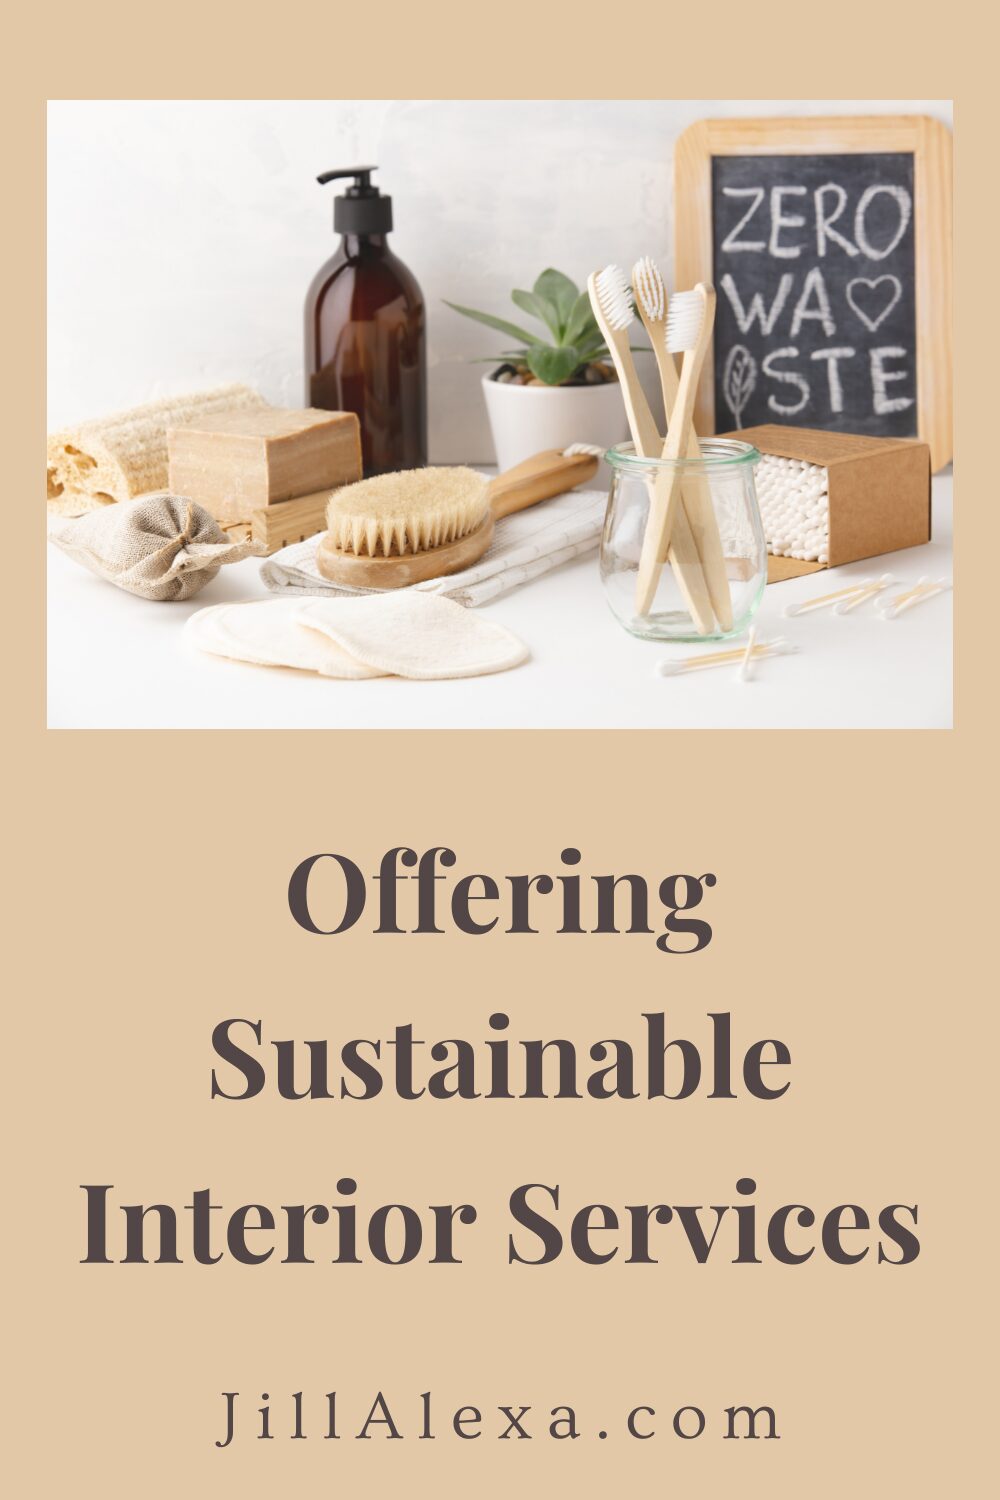 Use this helpful guide to find the hottest tips to offer more eco-friendly, sustainable services as an interior designer.